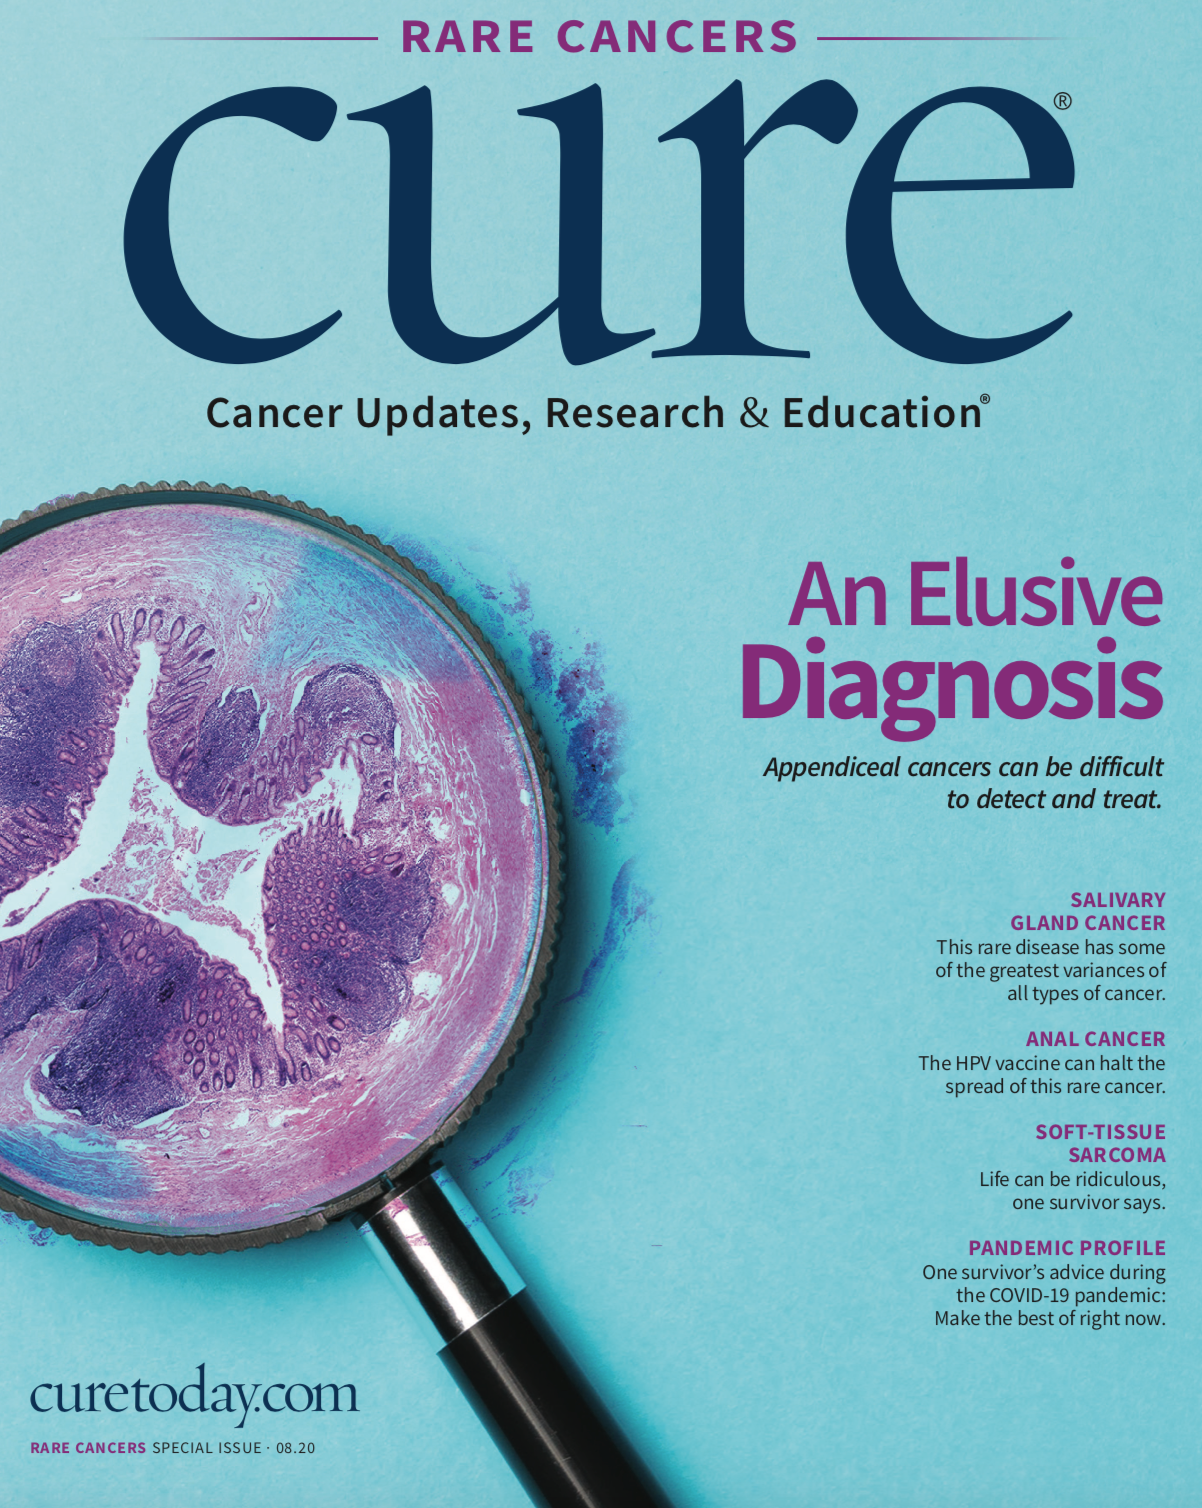 2020 Rare Cancers Special Issue